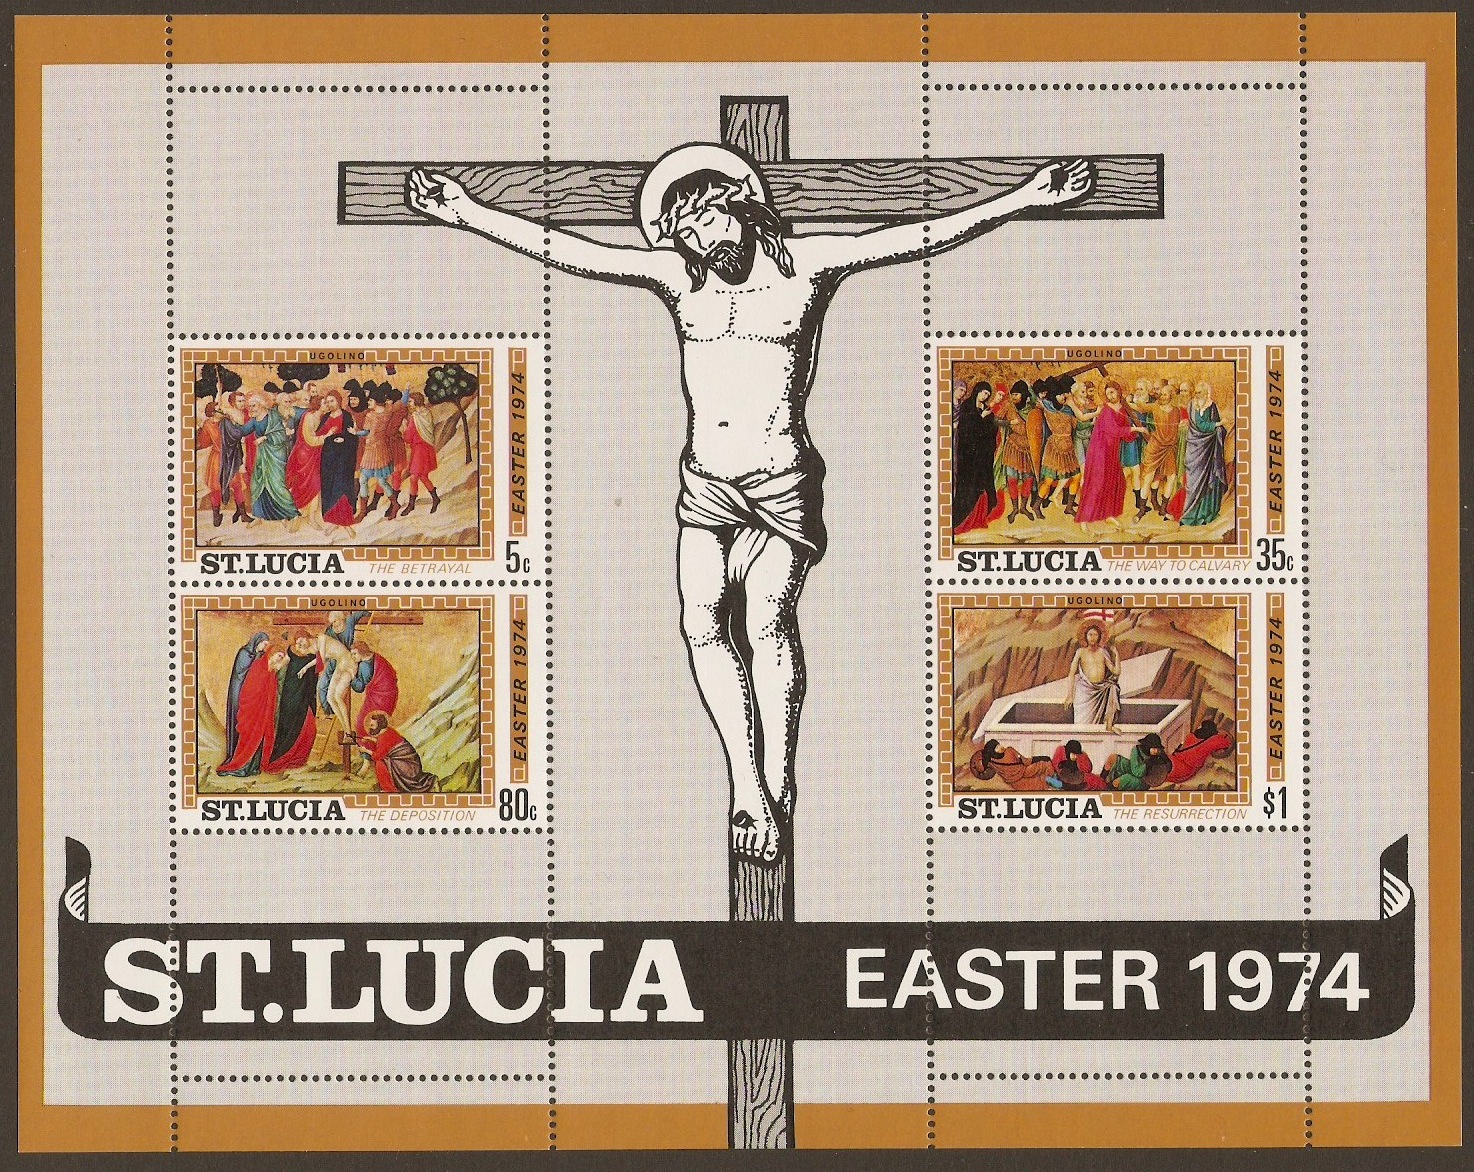 St Lucia 1974 Easter Paintings Sheet. SGMS373.